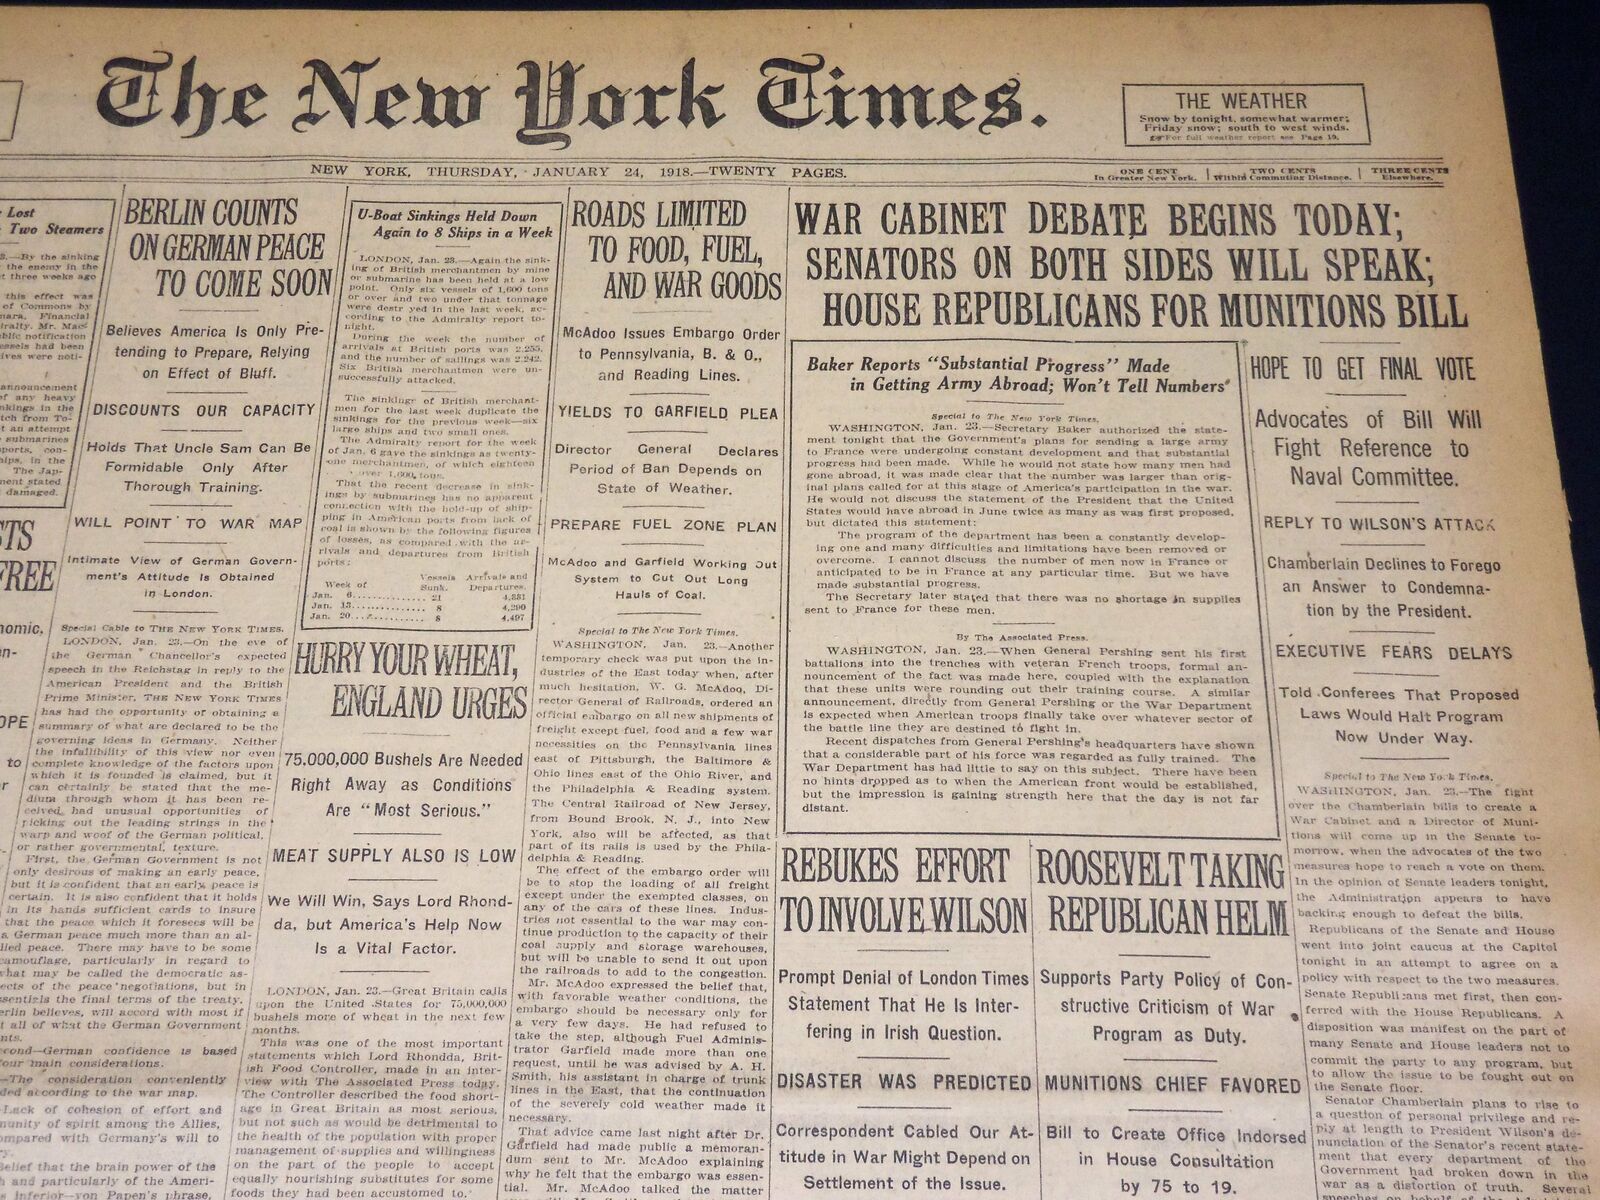 1918 JANUARY 24 NEW YORK TIMES - WAR CABINET DEBATE BEGINS TODAY - NT 7938